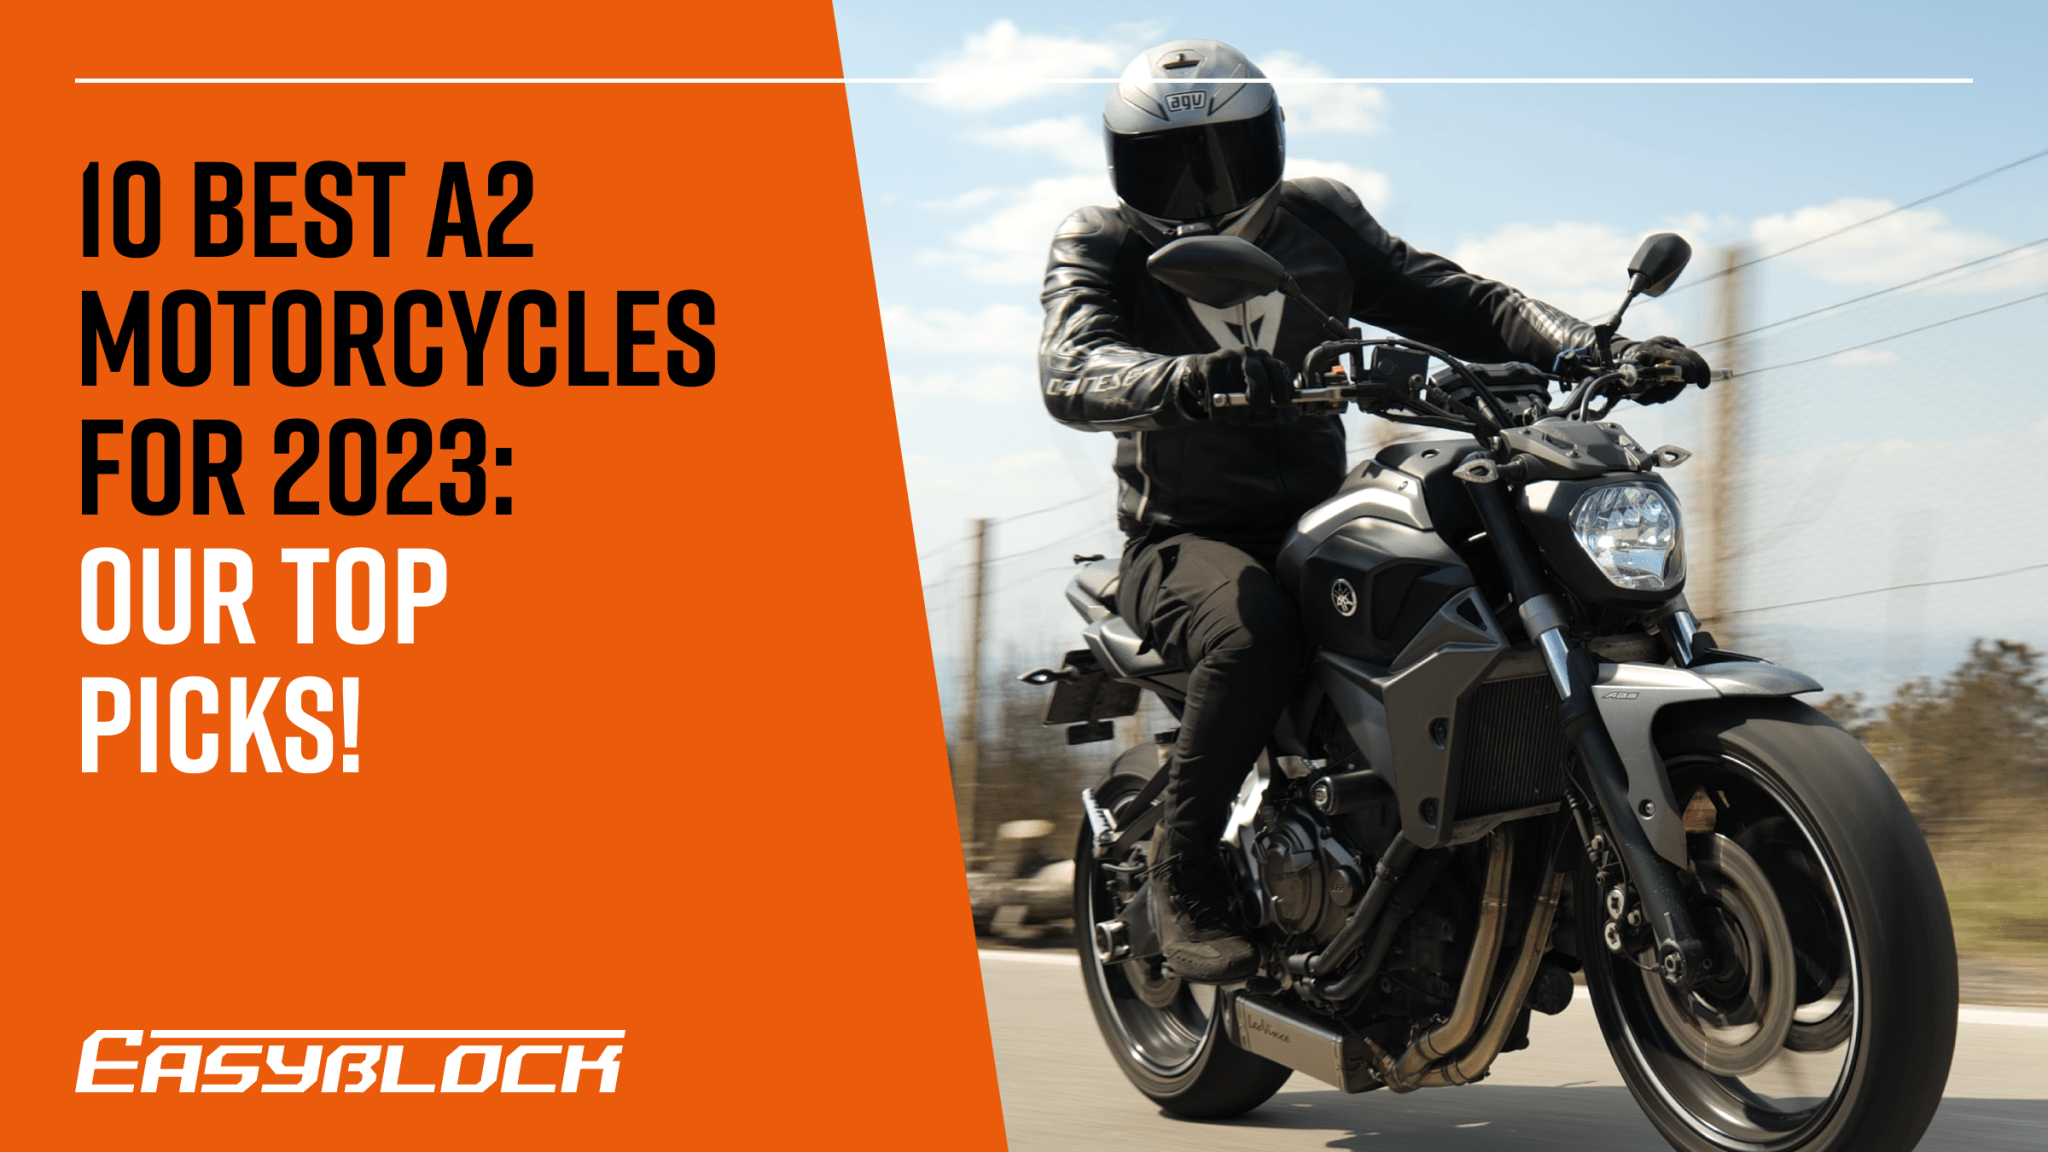 10 Best A2 Motorcycles for 2023: Our Top Picks!